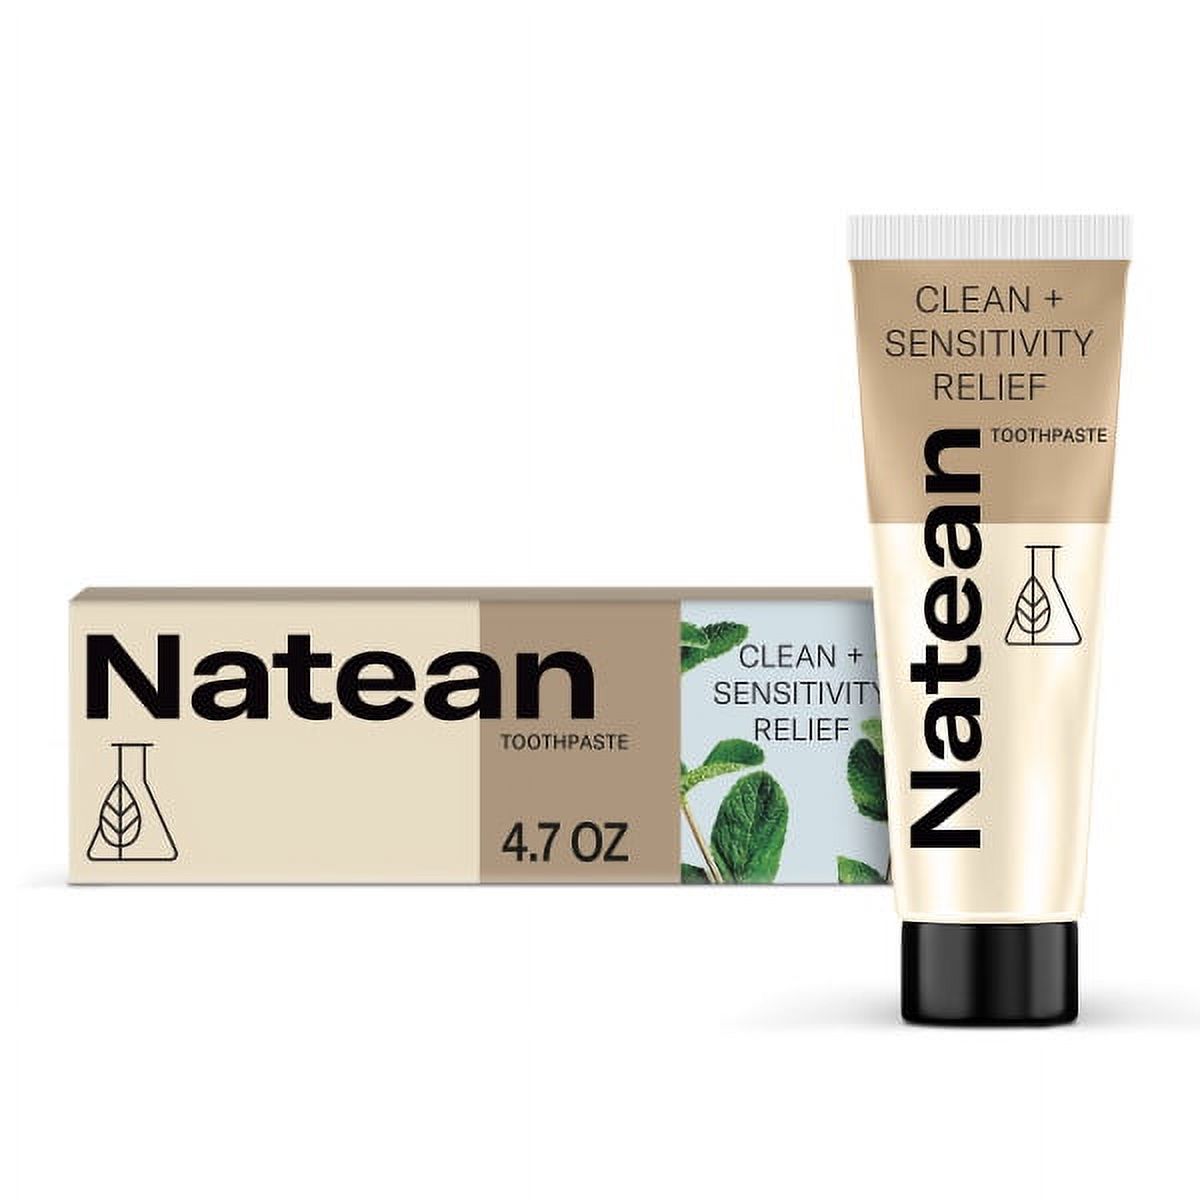 Natean Clean + Sensitivity Relief Toothpaste for Sensitive Teeth and Cavity Prevention, Soothing Mint - 4.7 oz Tube - image 1 of 9